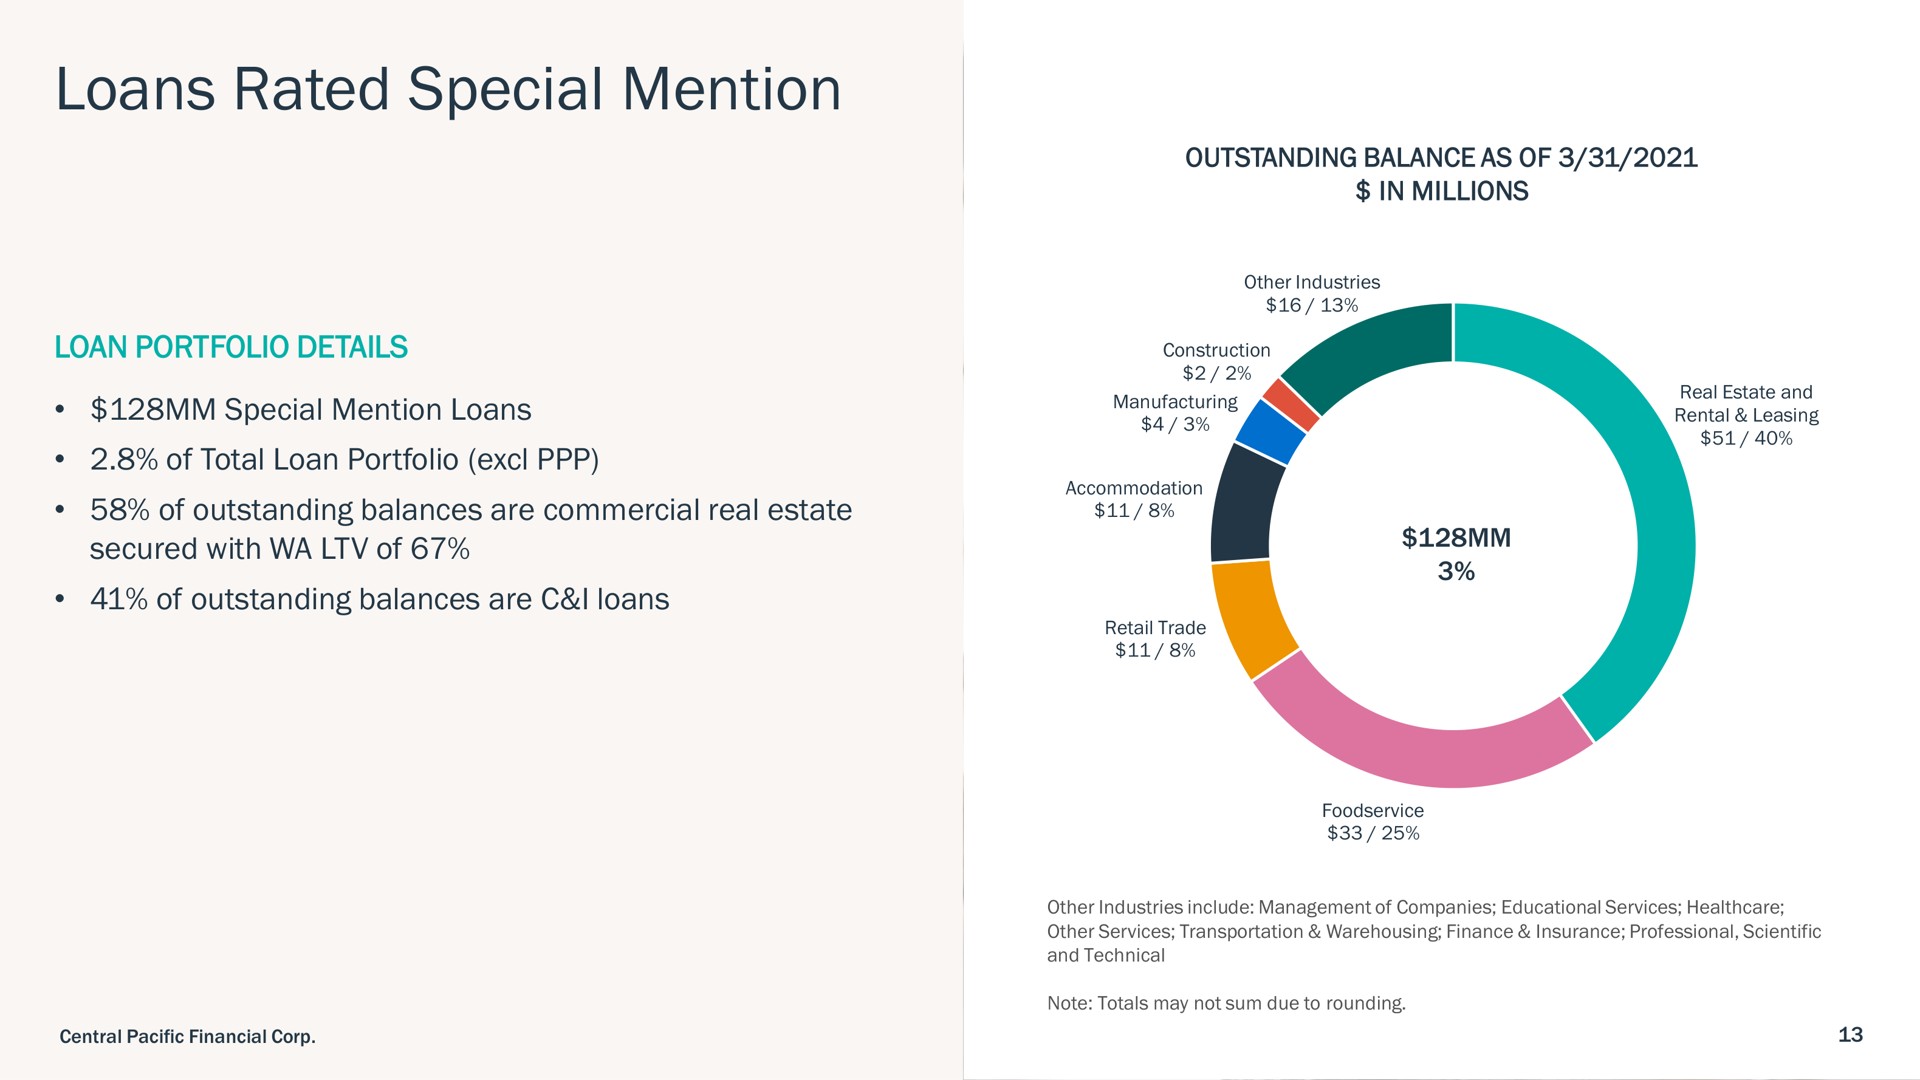 loans rated special mention | Central Pacific Financial